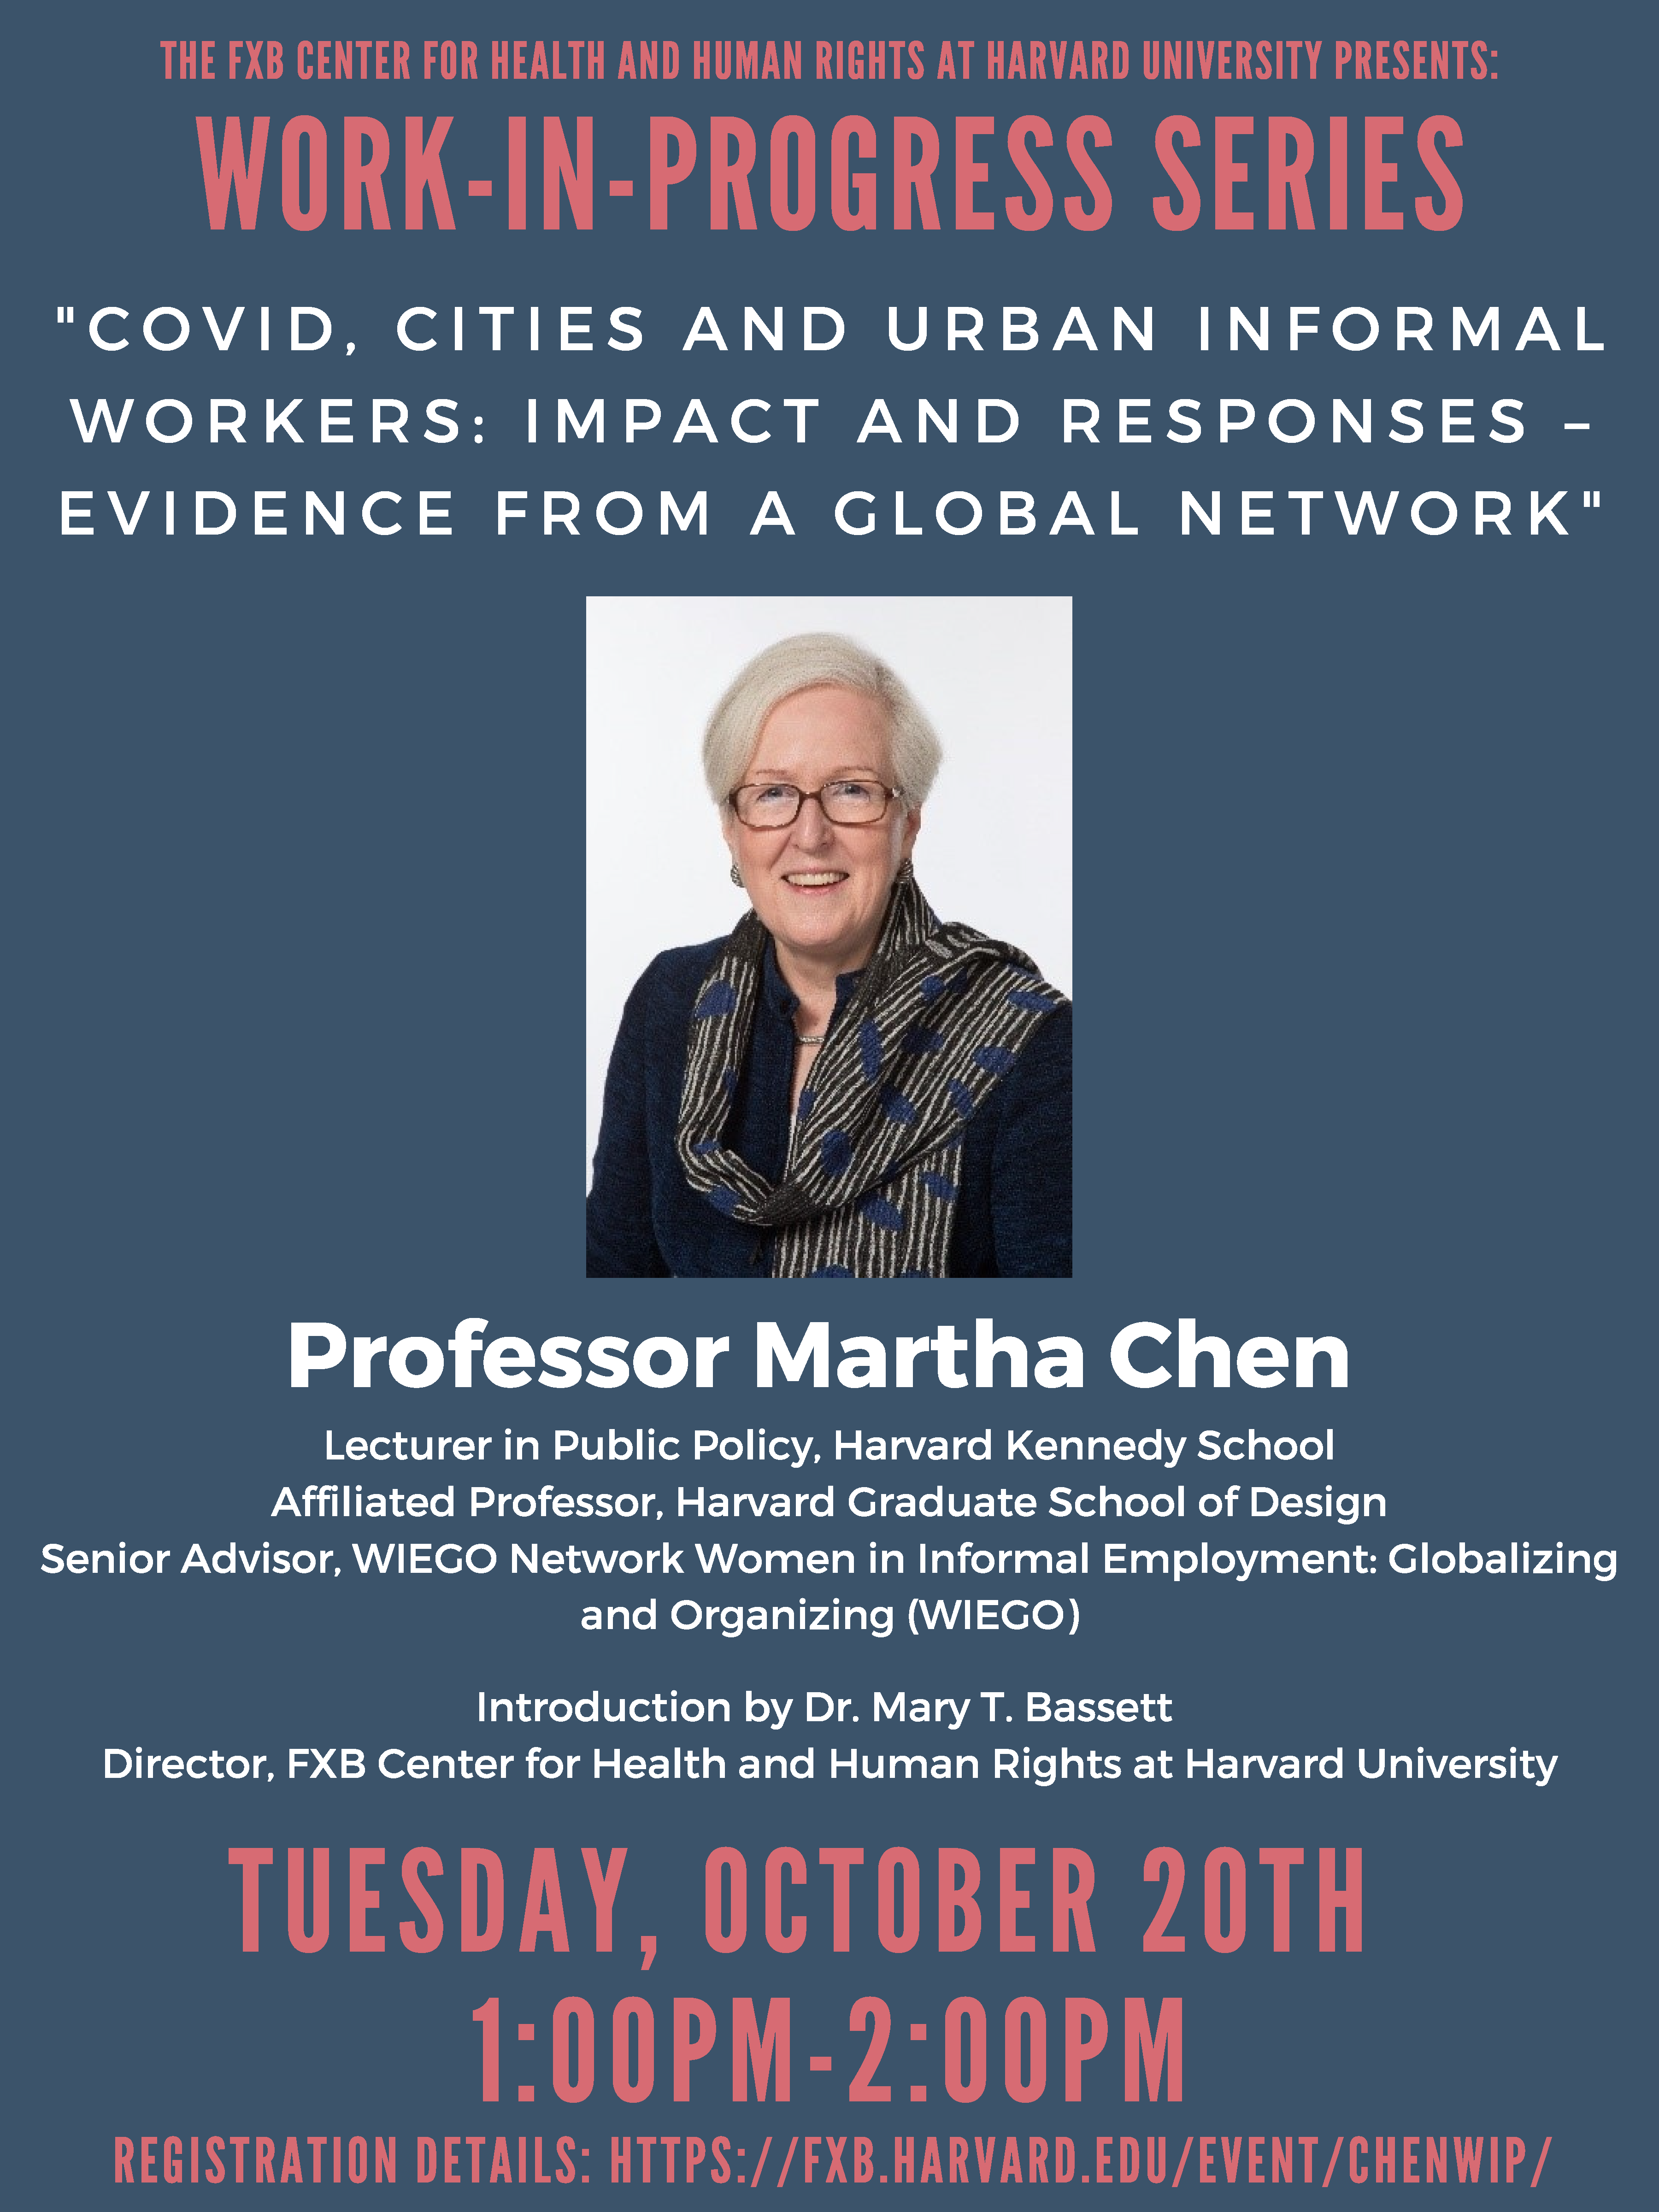 Event flyer with headshot of Professor Martha Chen, title of Professor Chen's presentation, and registration information.